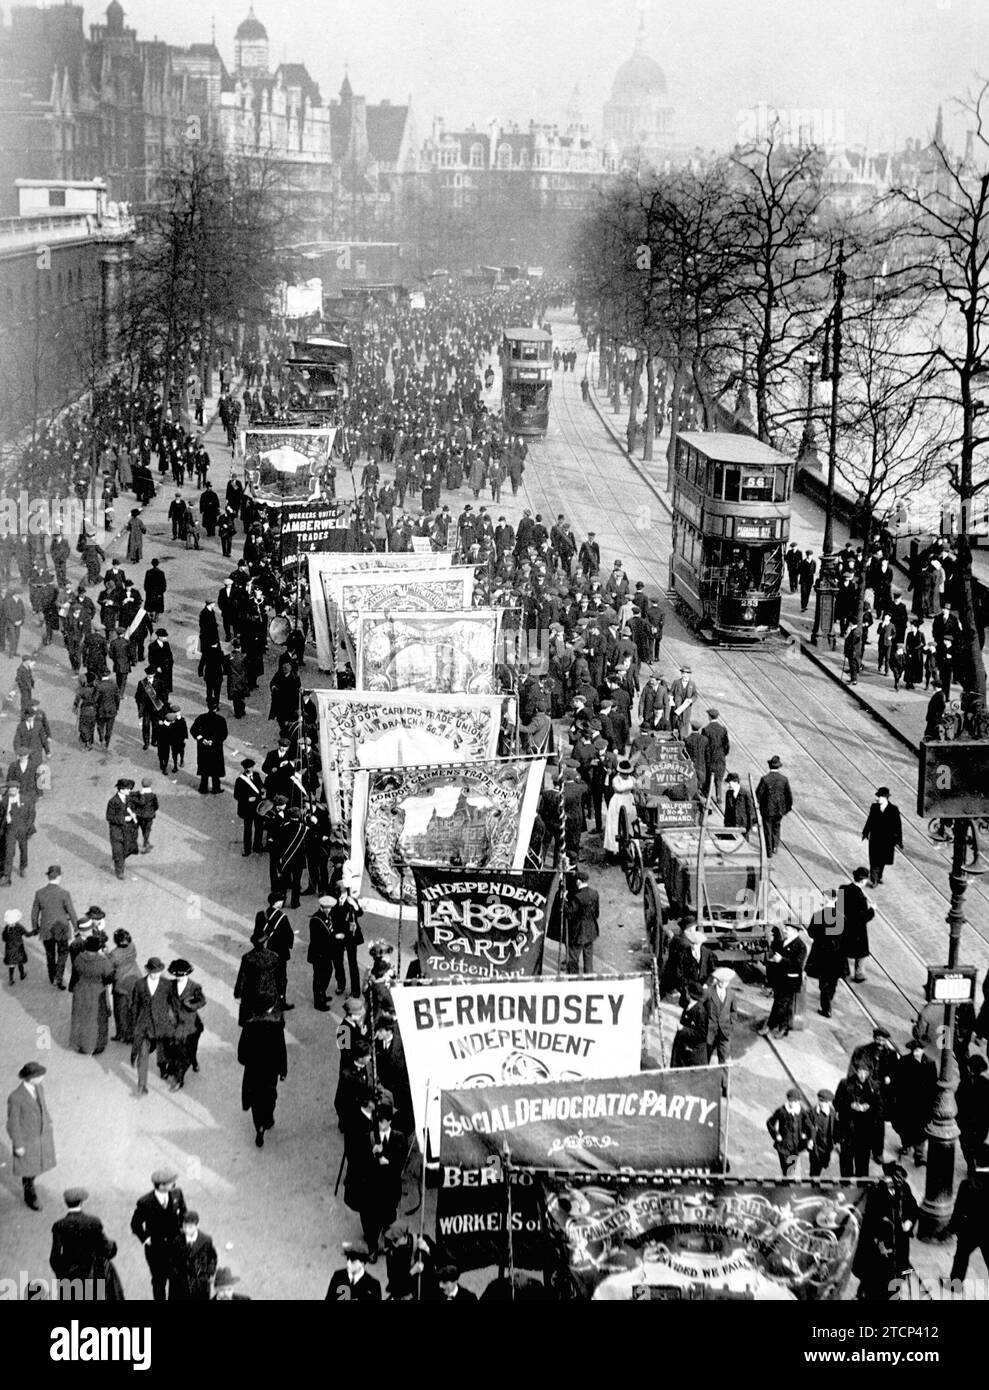 12/31/1913. Socialist demonstration in London. Aspect of the Waterloo Bridge at the passage of the demonstration carried out by the Trade Unions to protest against the expulsion of the nine Socialist Leaders of Southern Africa. Credit: Album / Archivo ABC / Louis Hugelmann Stock Photo